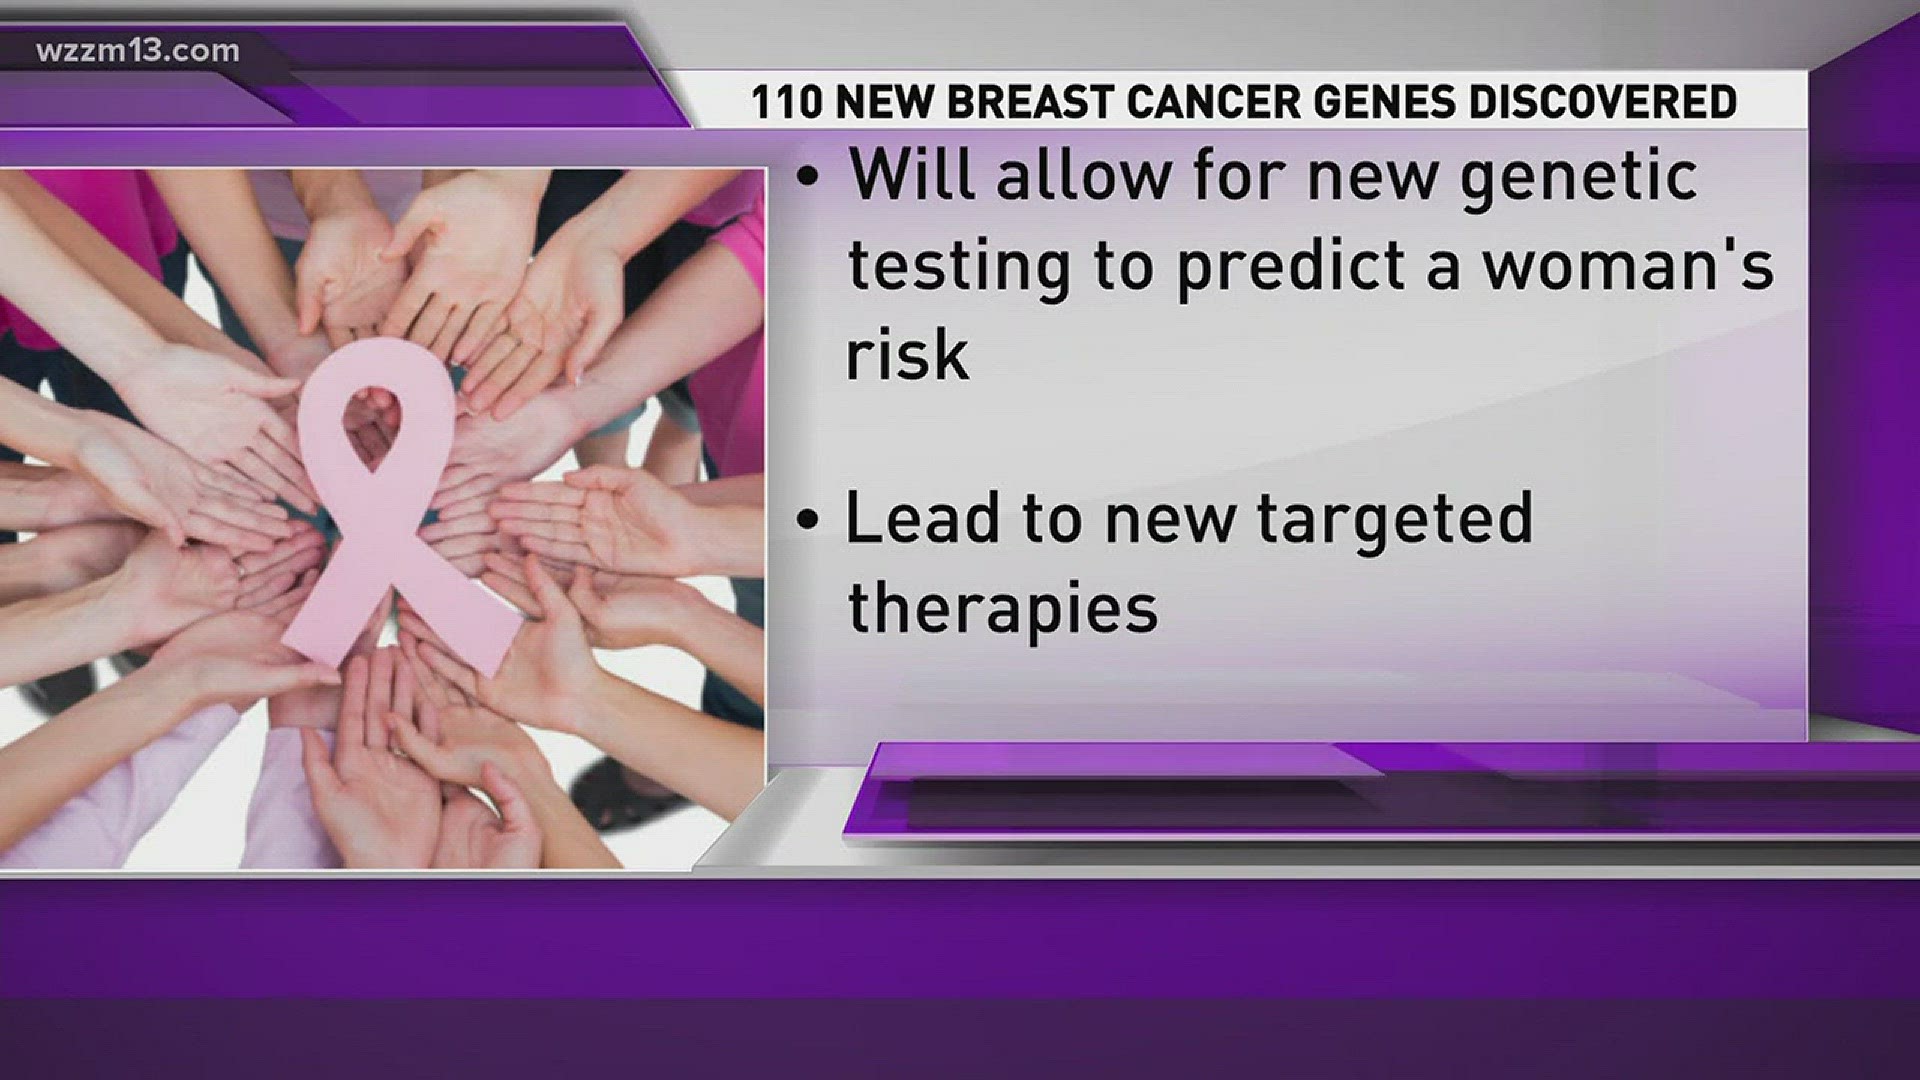 13 Friends For Life: New breast cancer genes discovered